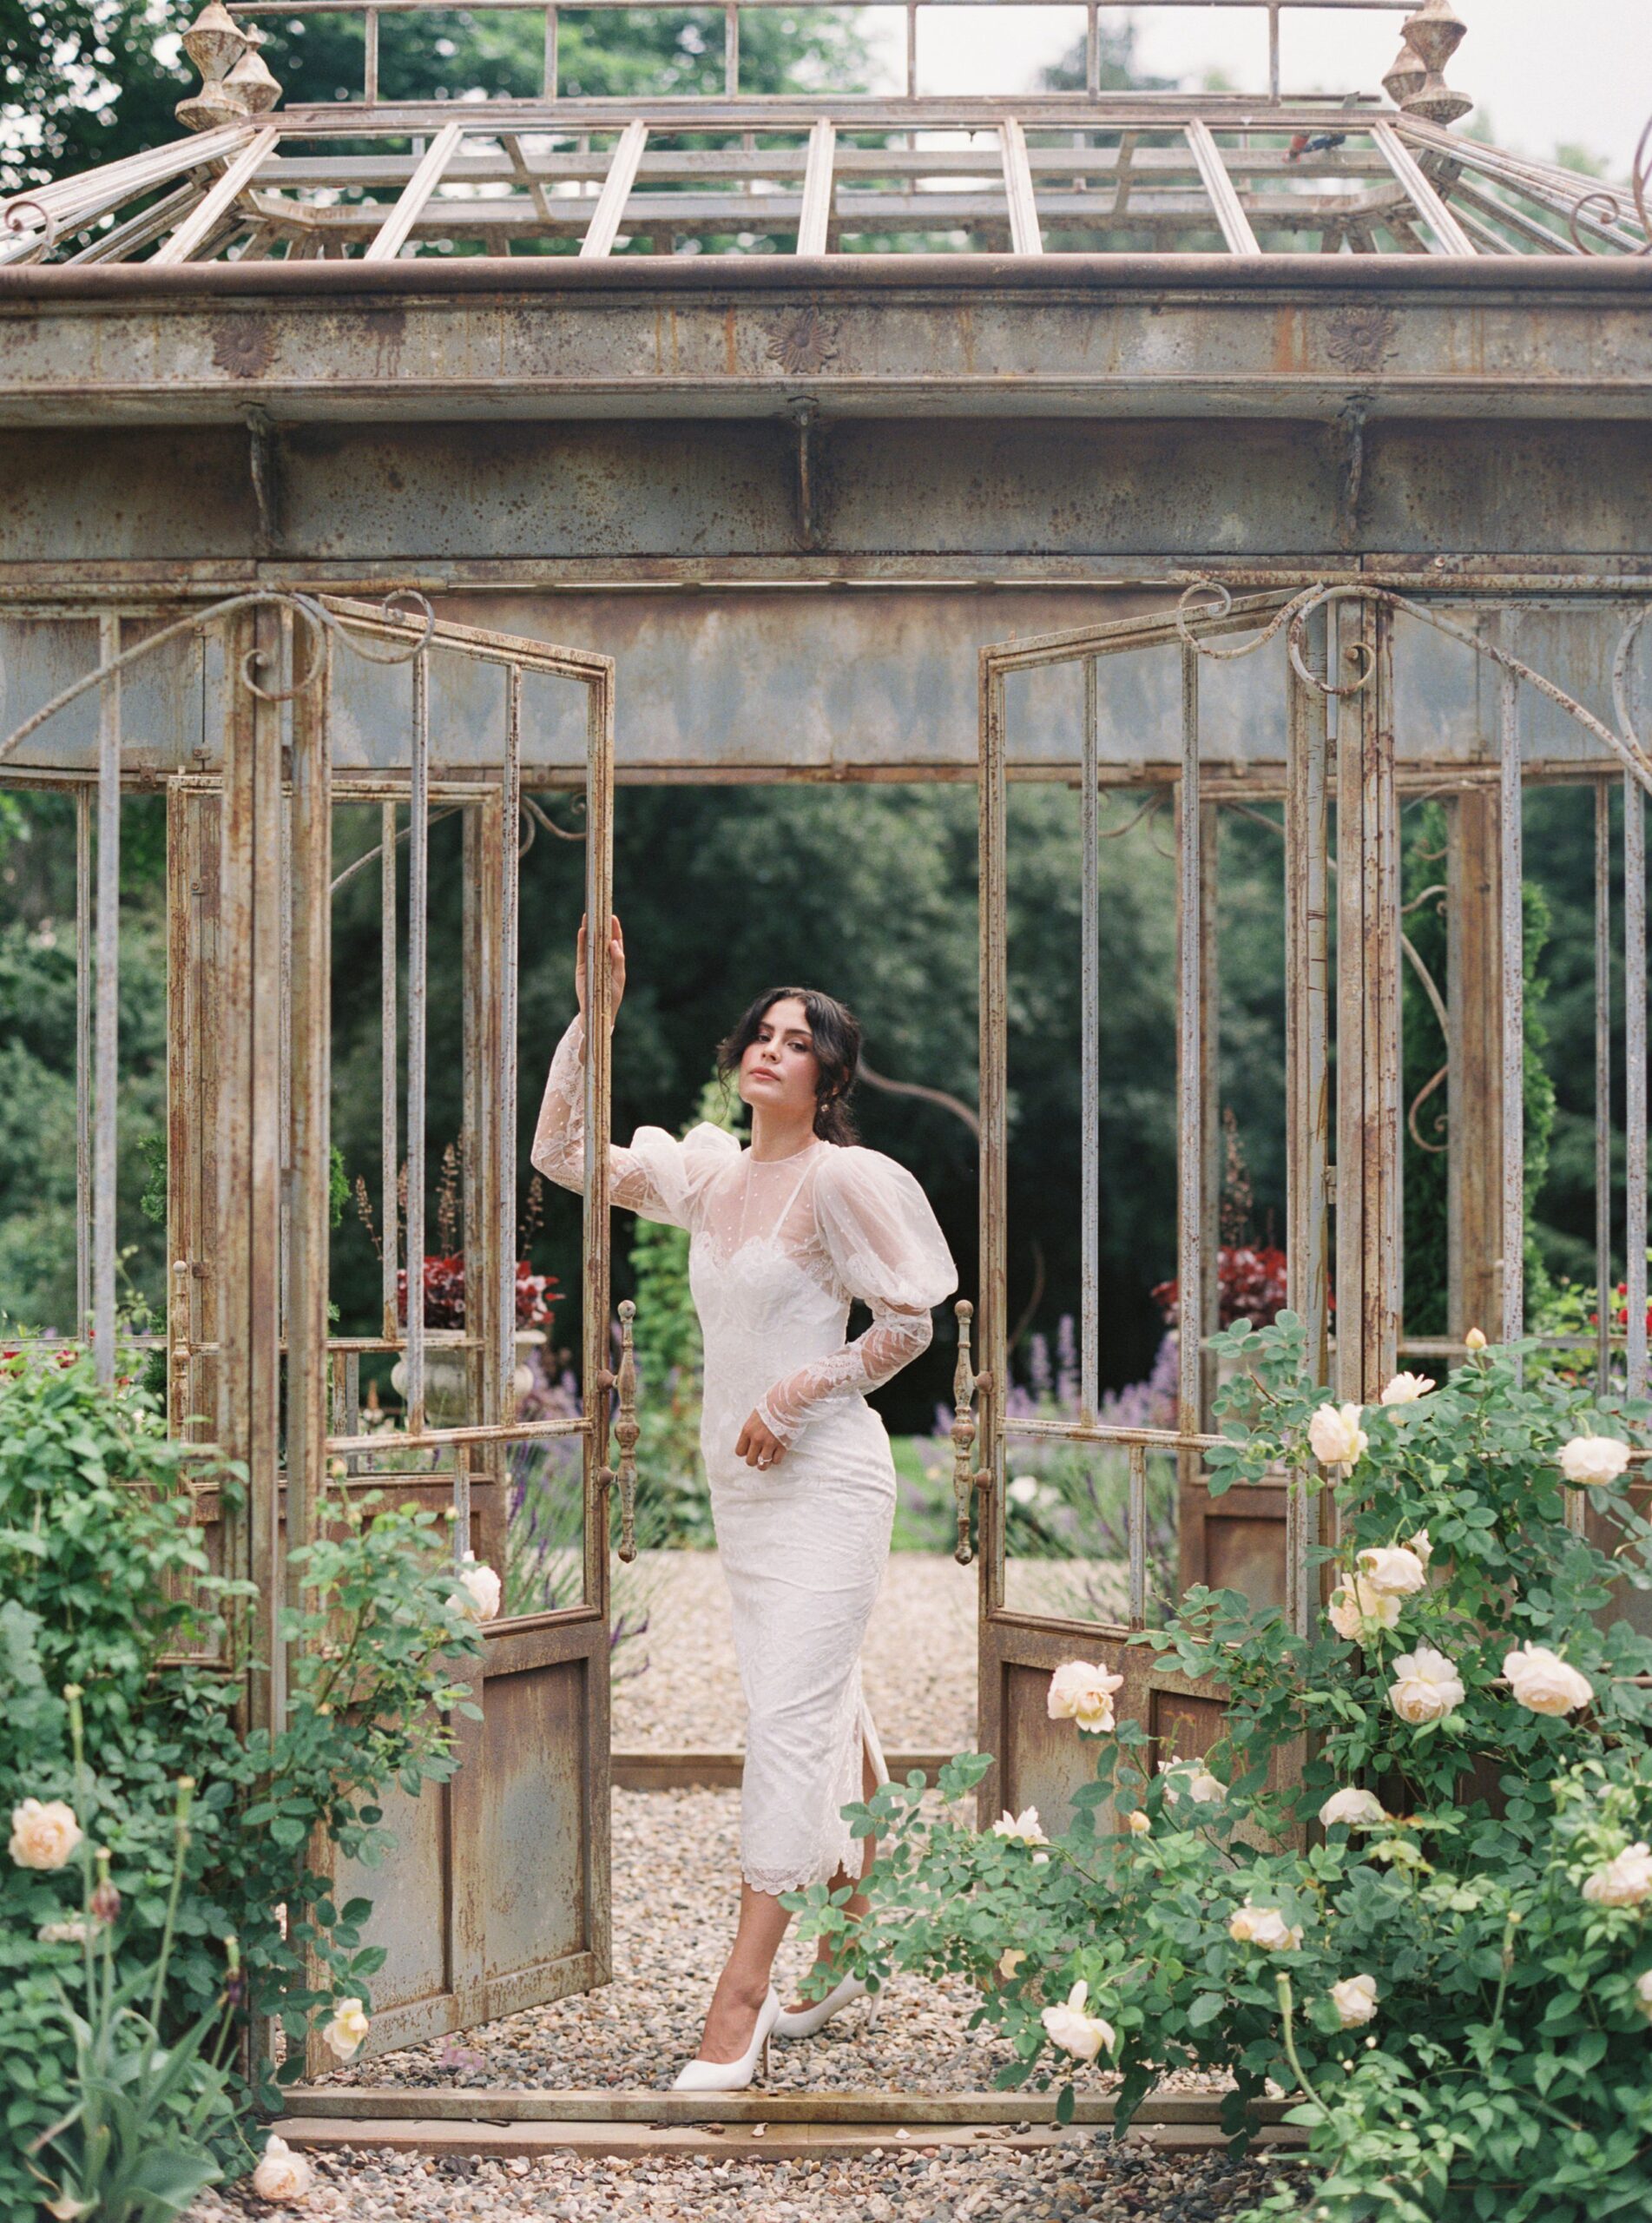 Beautiful Bride at European Inspired Greencrest Manor Wedding Venue photographed on film by destination wedding photographer Sarah Sunstrom Photography.